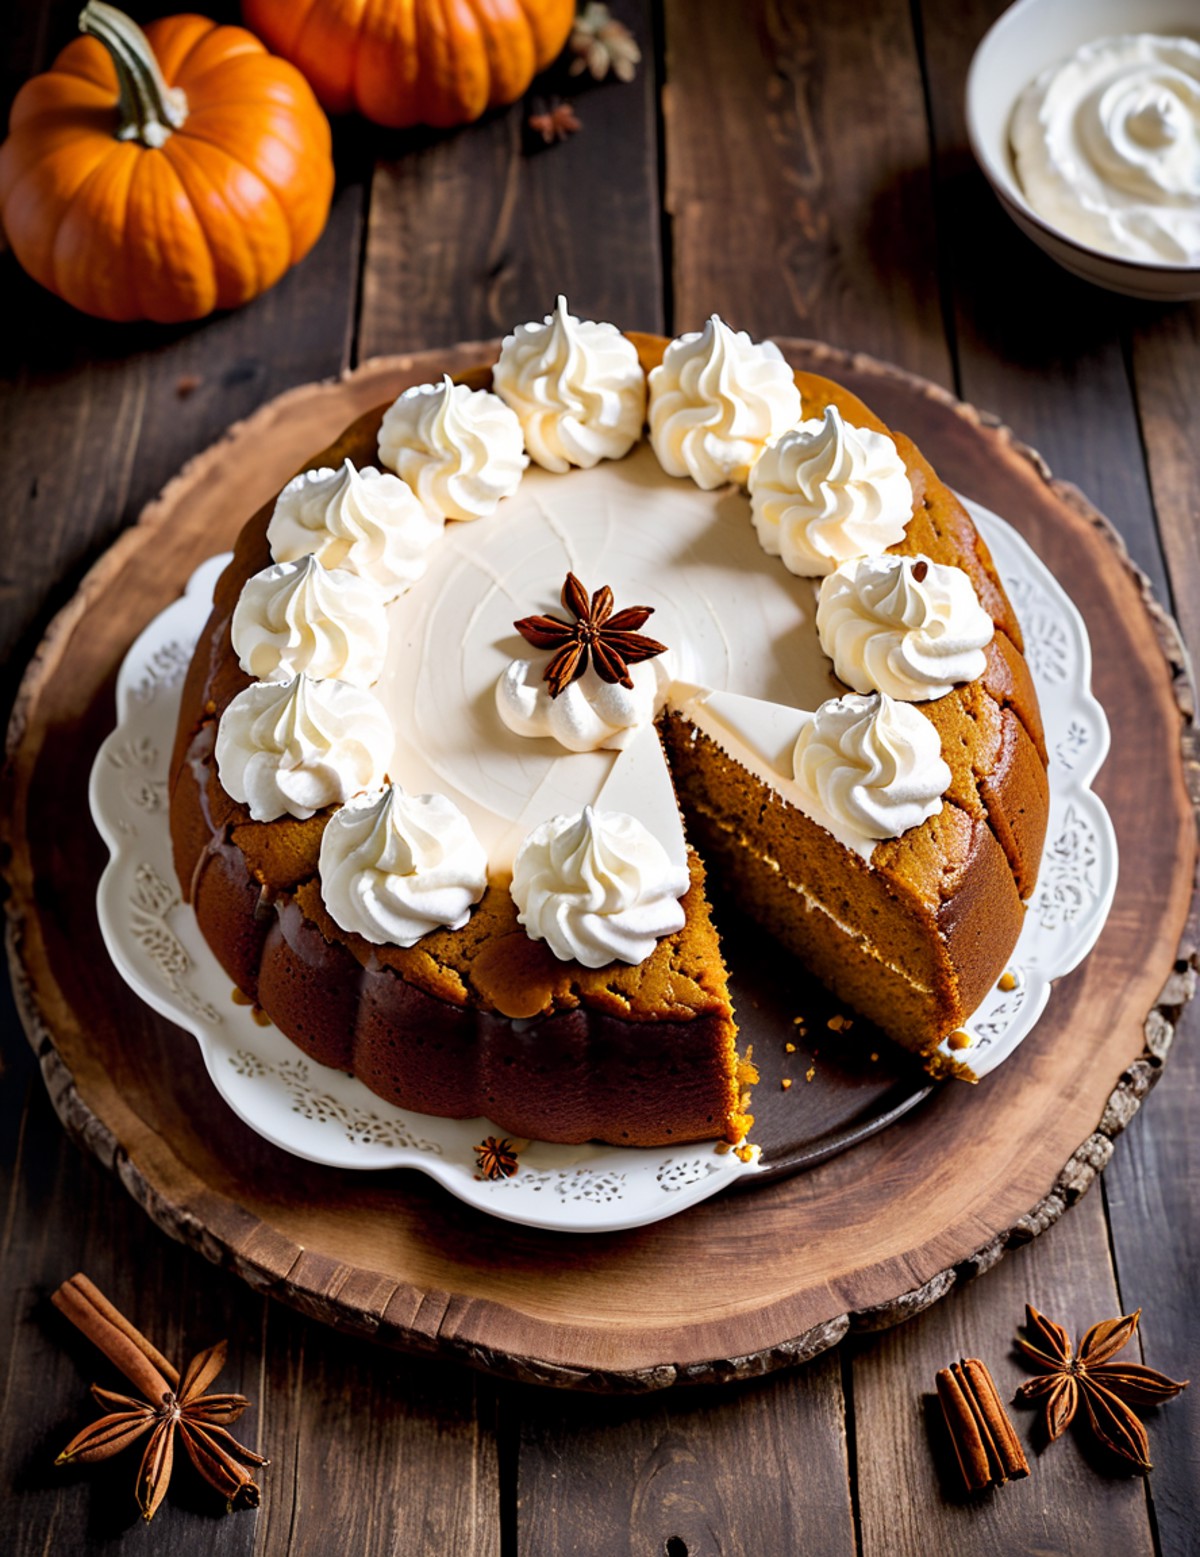 food photography of a spiced pumpkin cake, sitting on a decorative autumn platter, rustic wood table, photoshoot, high qua...